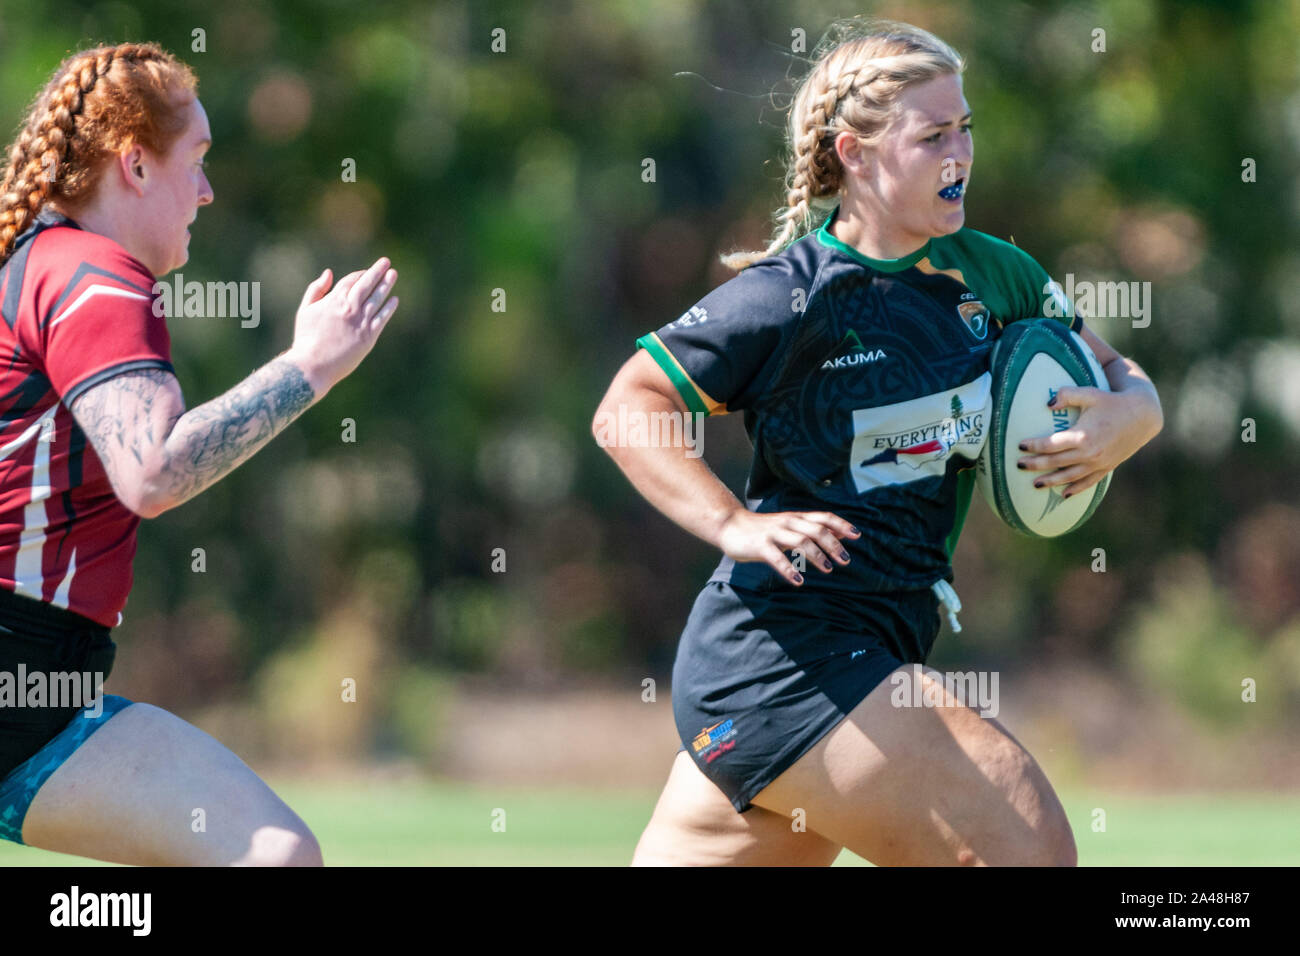 Southern Pines, North Carolina, USA. 12th Oct, 2019. Oct. 12, 2019 - Southern Pines, N.C., USA - Carolinas Geographic Rugby Union women's rugby action between the Southern Pines 'The Celts' and Camp Lejeune Maniacks at the National Athletic Village. Southern Pines defeated Camp Lejeune, 39-0, for the team's first-ever Carolina Geographic Rugby Union matrix win. Credit: Timothy L. Hale/ZUMA Wire/Alamy Live News Stock Photo